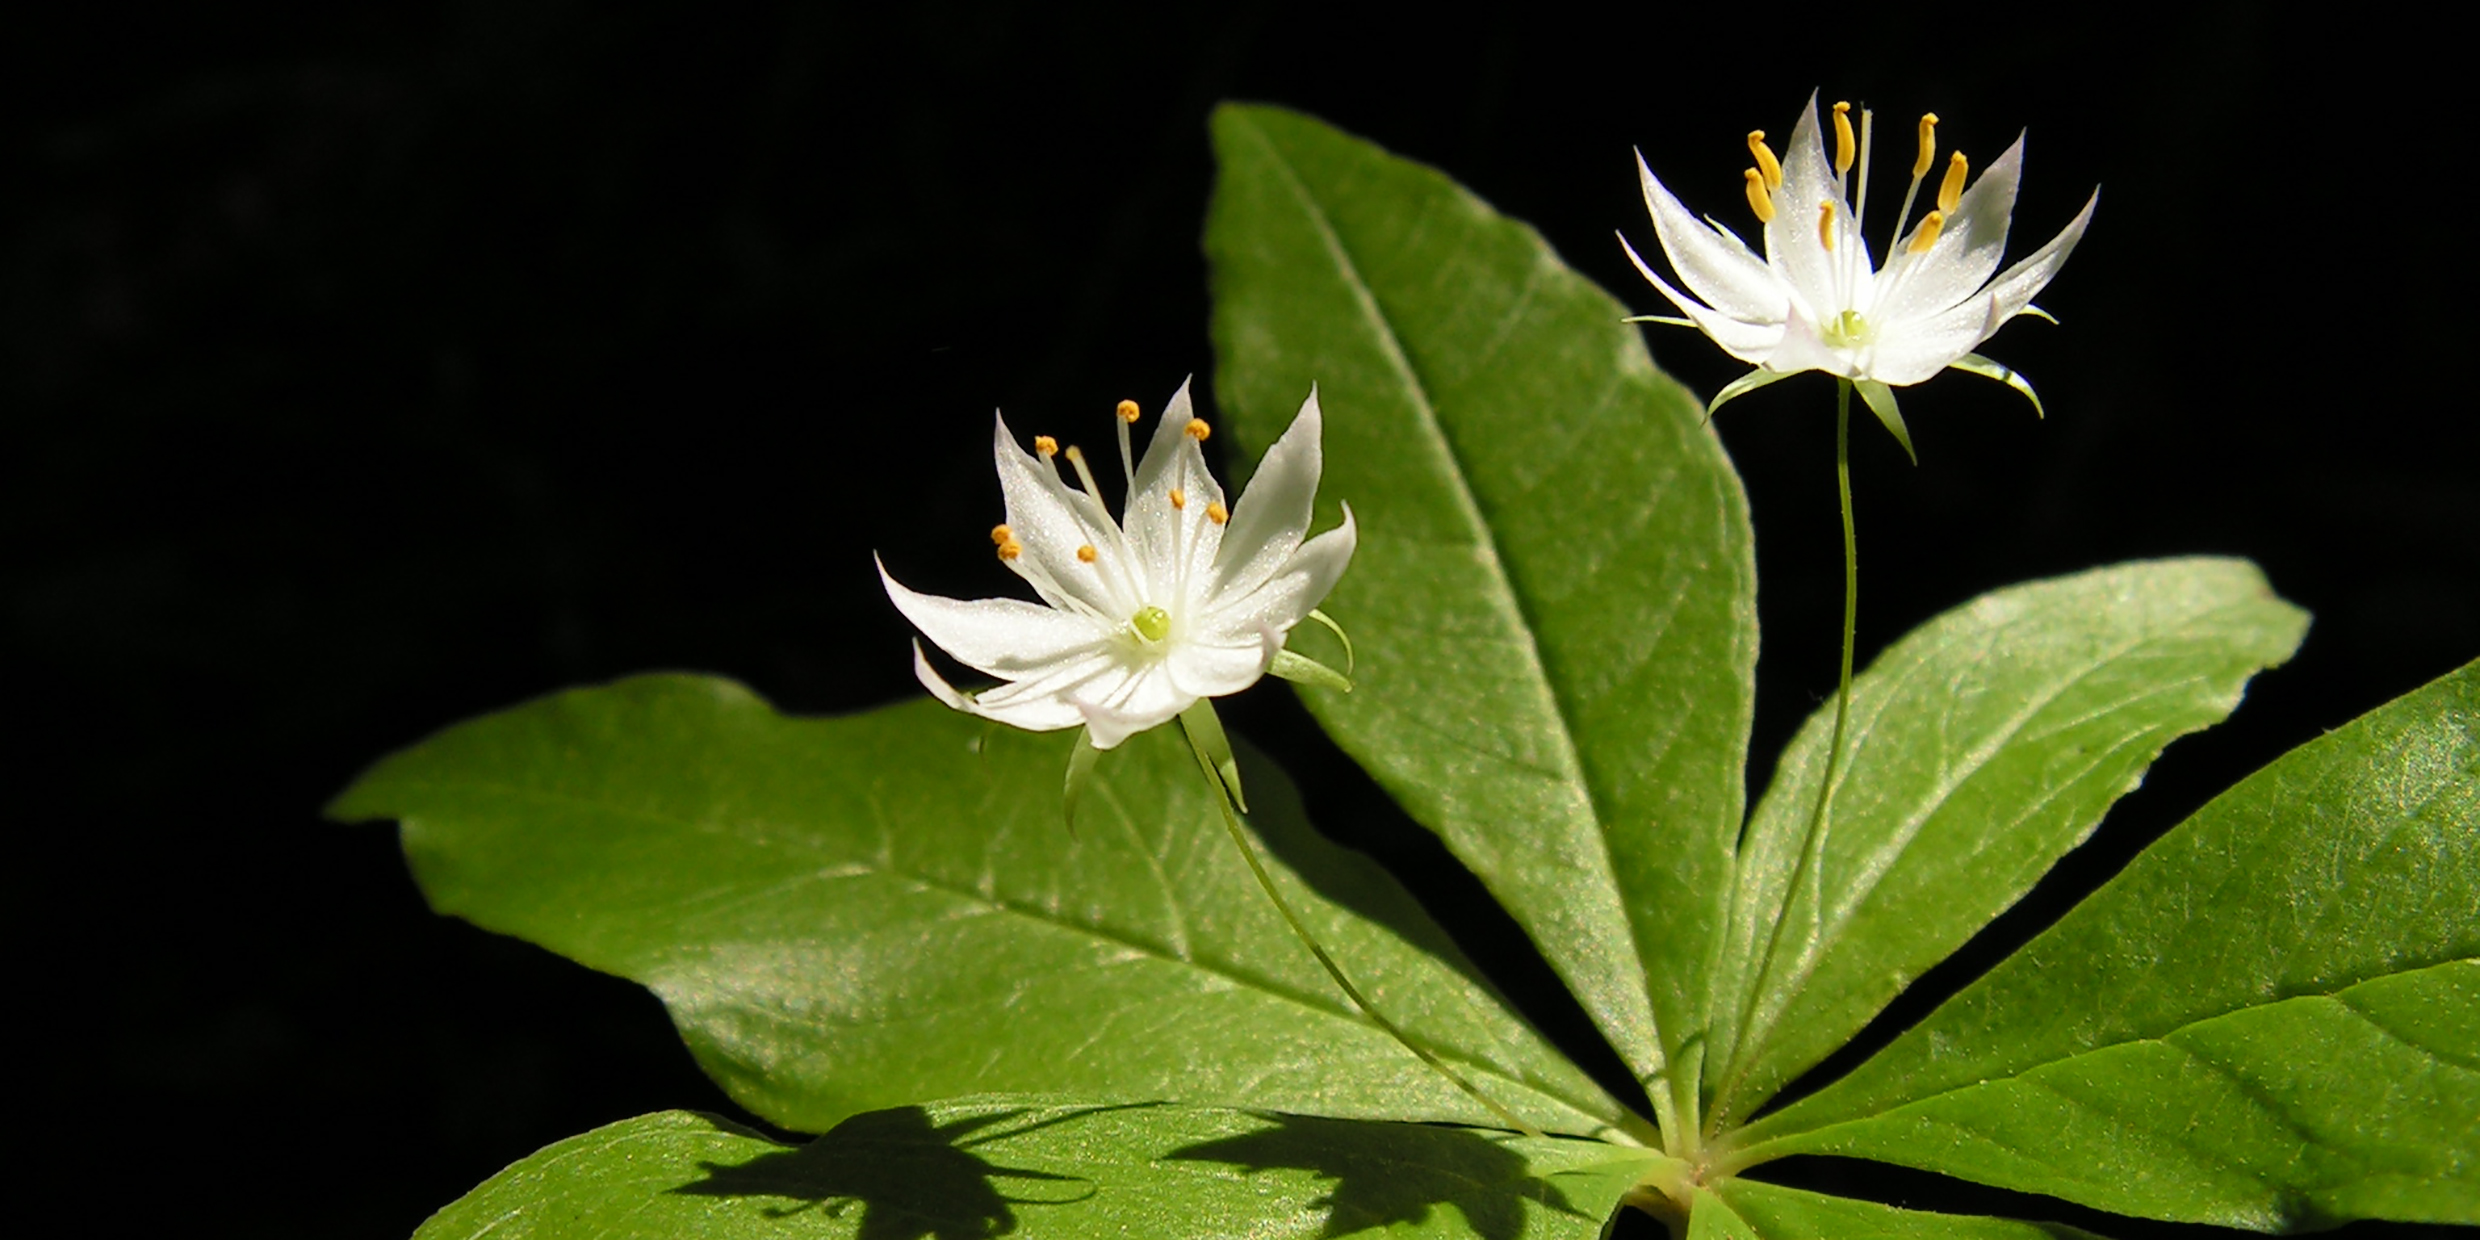 Image of small white star-shaped flowers